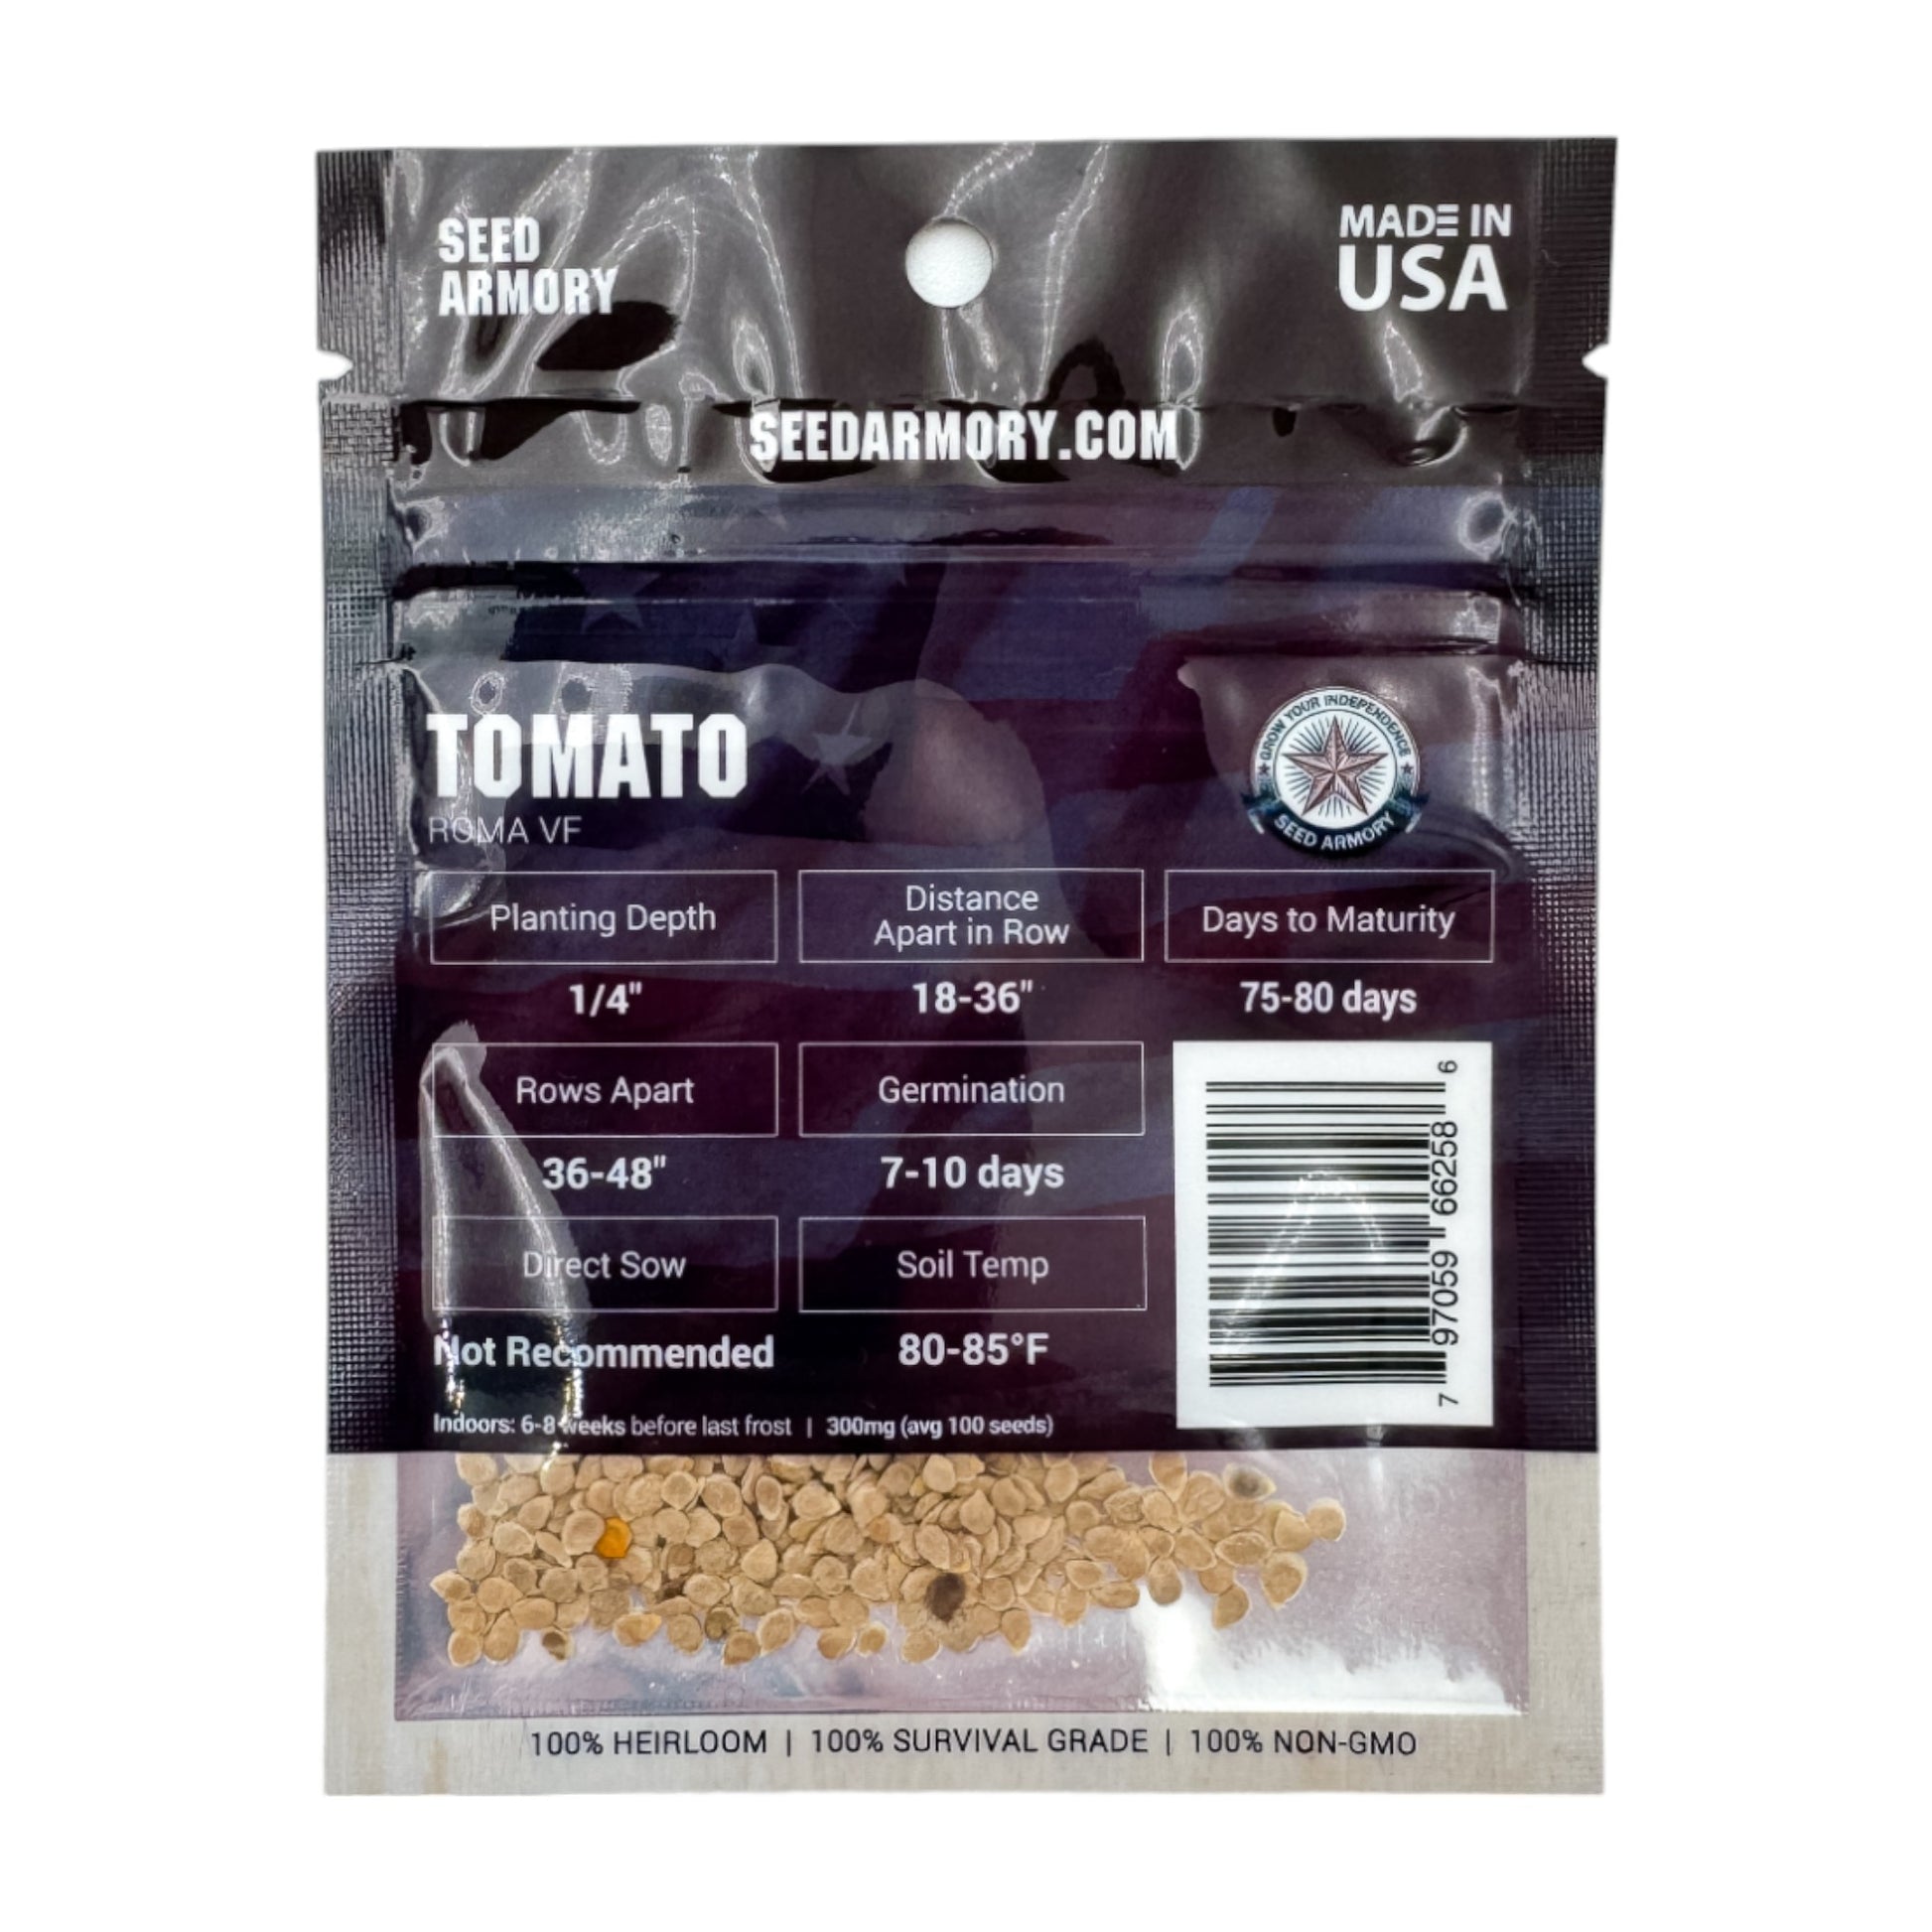 Reverse view of Roma VF tomato heirloom seeds in a mylar package with planting instructions